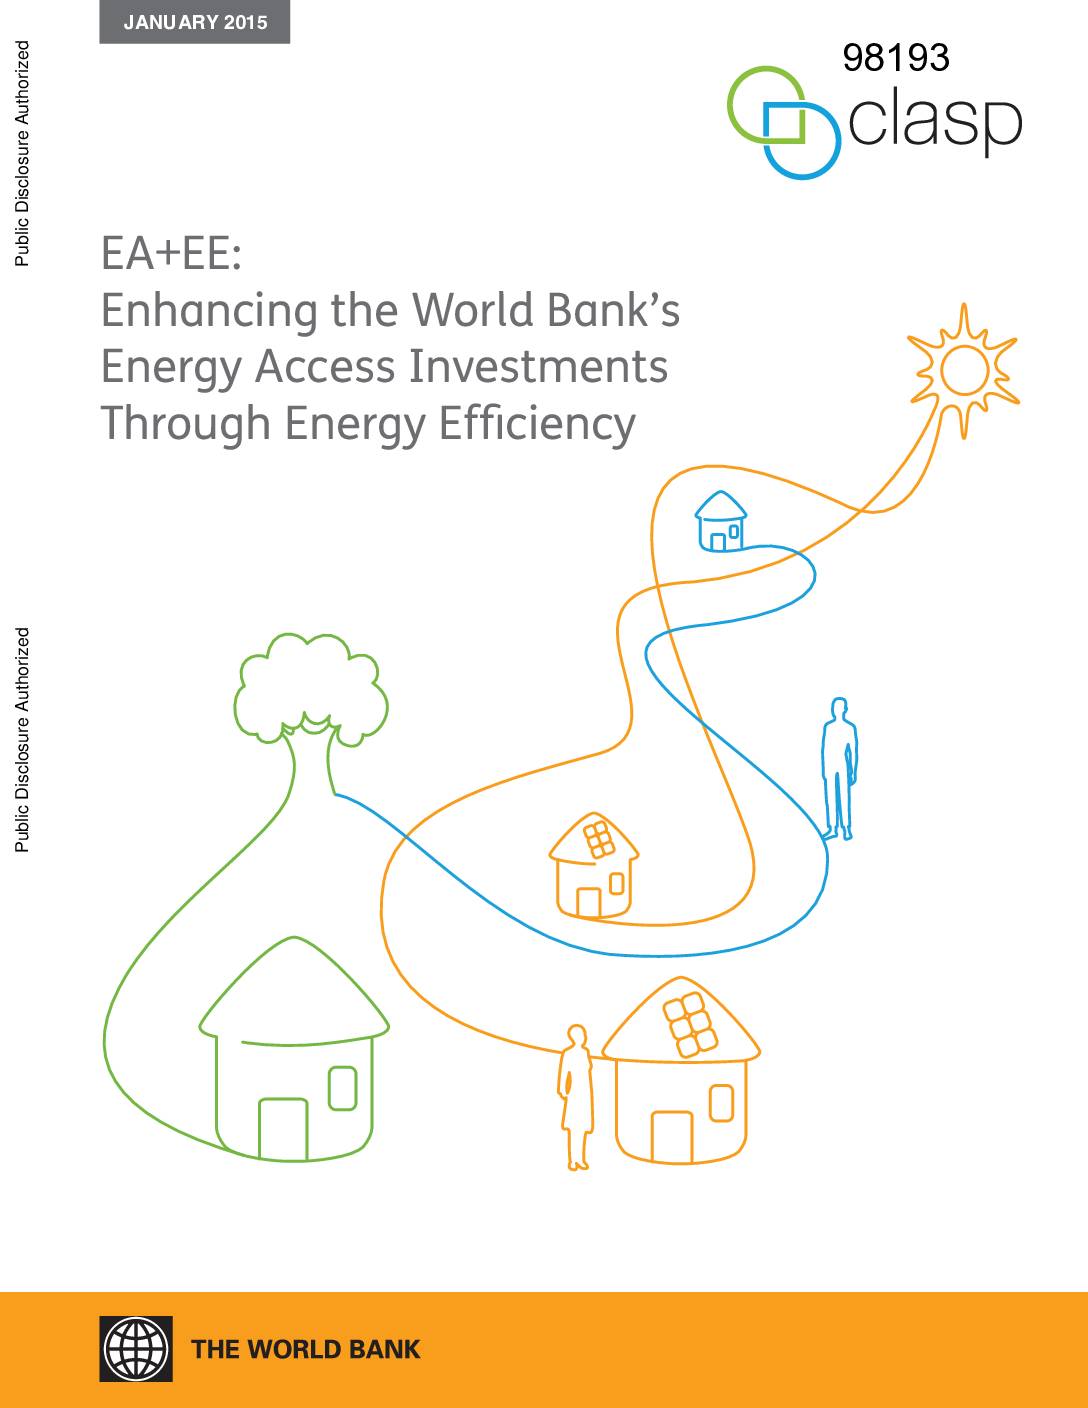 EA + EE: Enhancing the World Bank’s Energy Access Investments Through Energy Efficiency